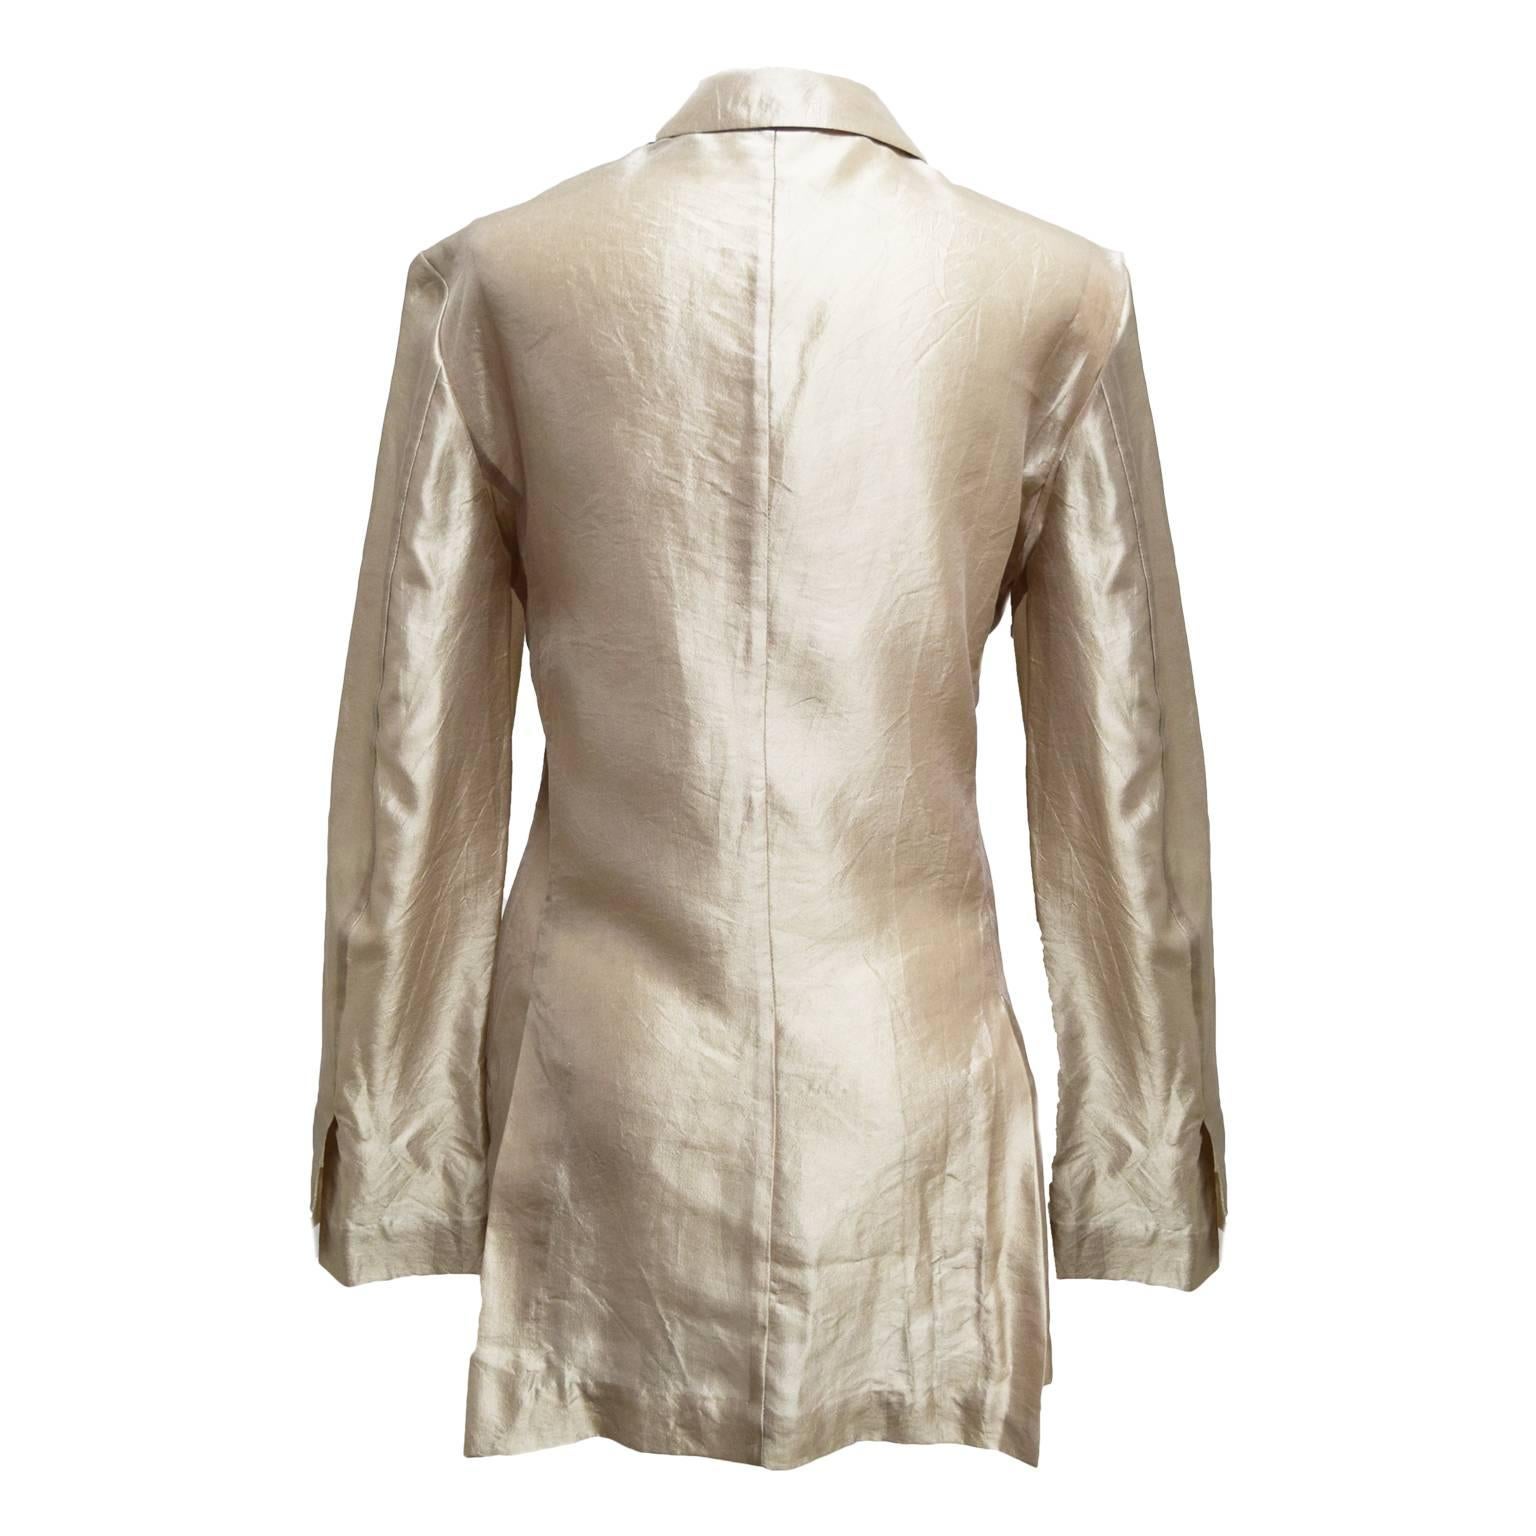 This great jacket by Haider Ackerman is a champagne crinkled silk, it is a open jacket with side pockets and very light. This jacket is good for pairing with a cocktail dress or a light blouse and pants